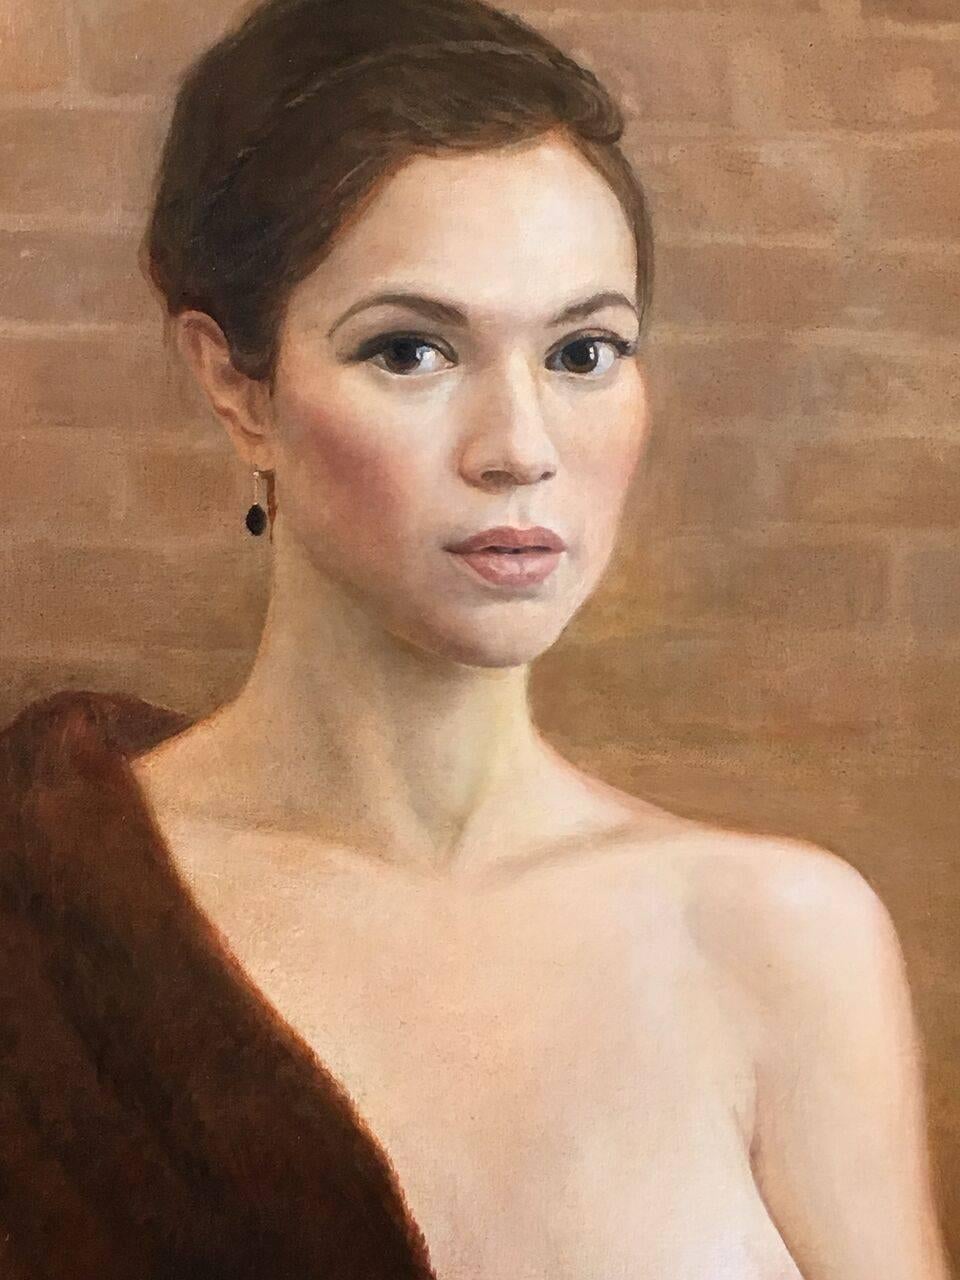 Lady in a Fur - Scout / oil on linen - Painting by David Molesky